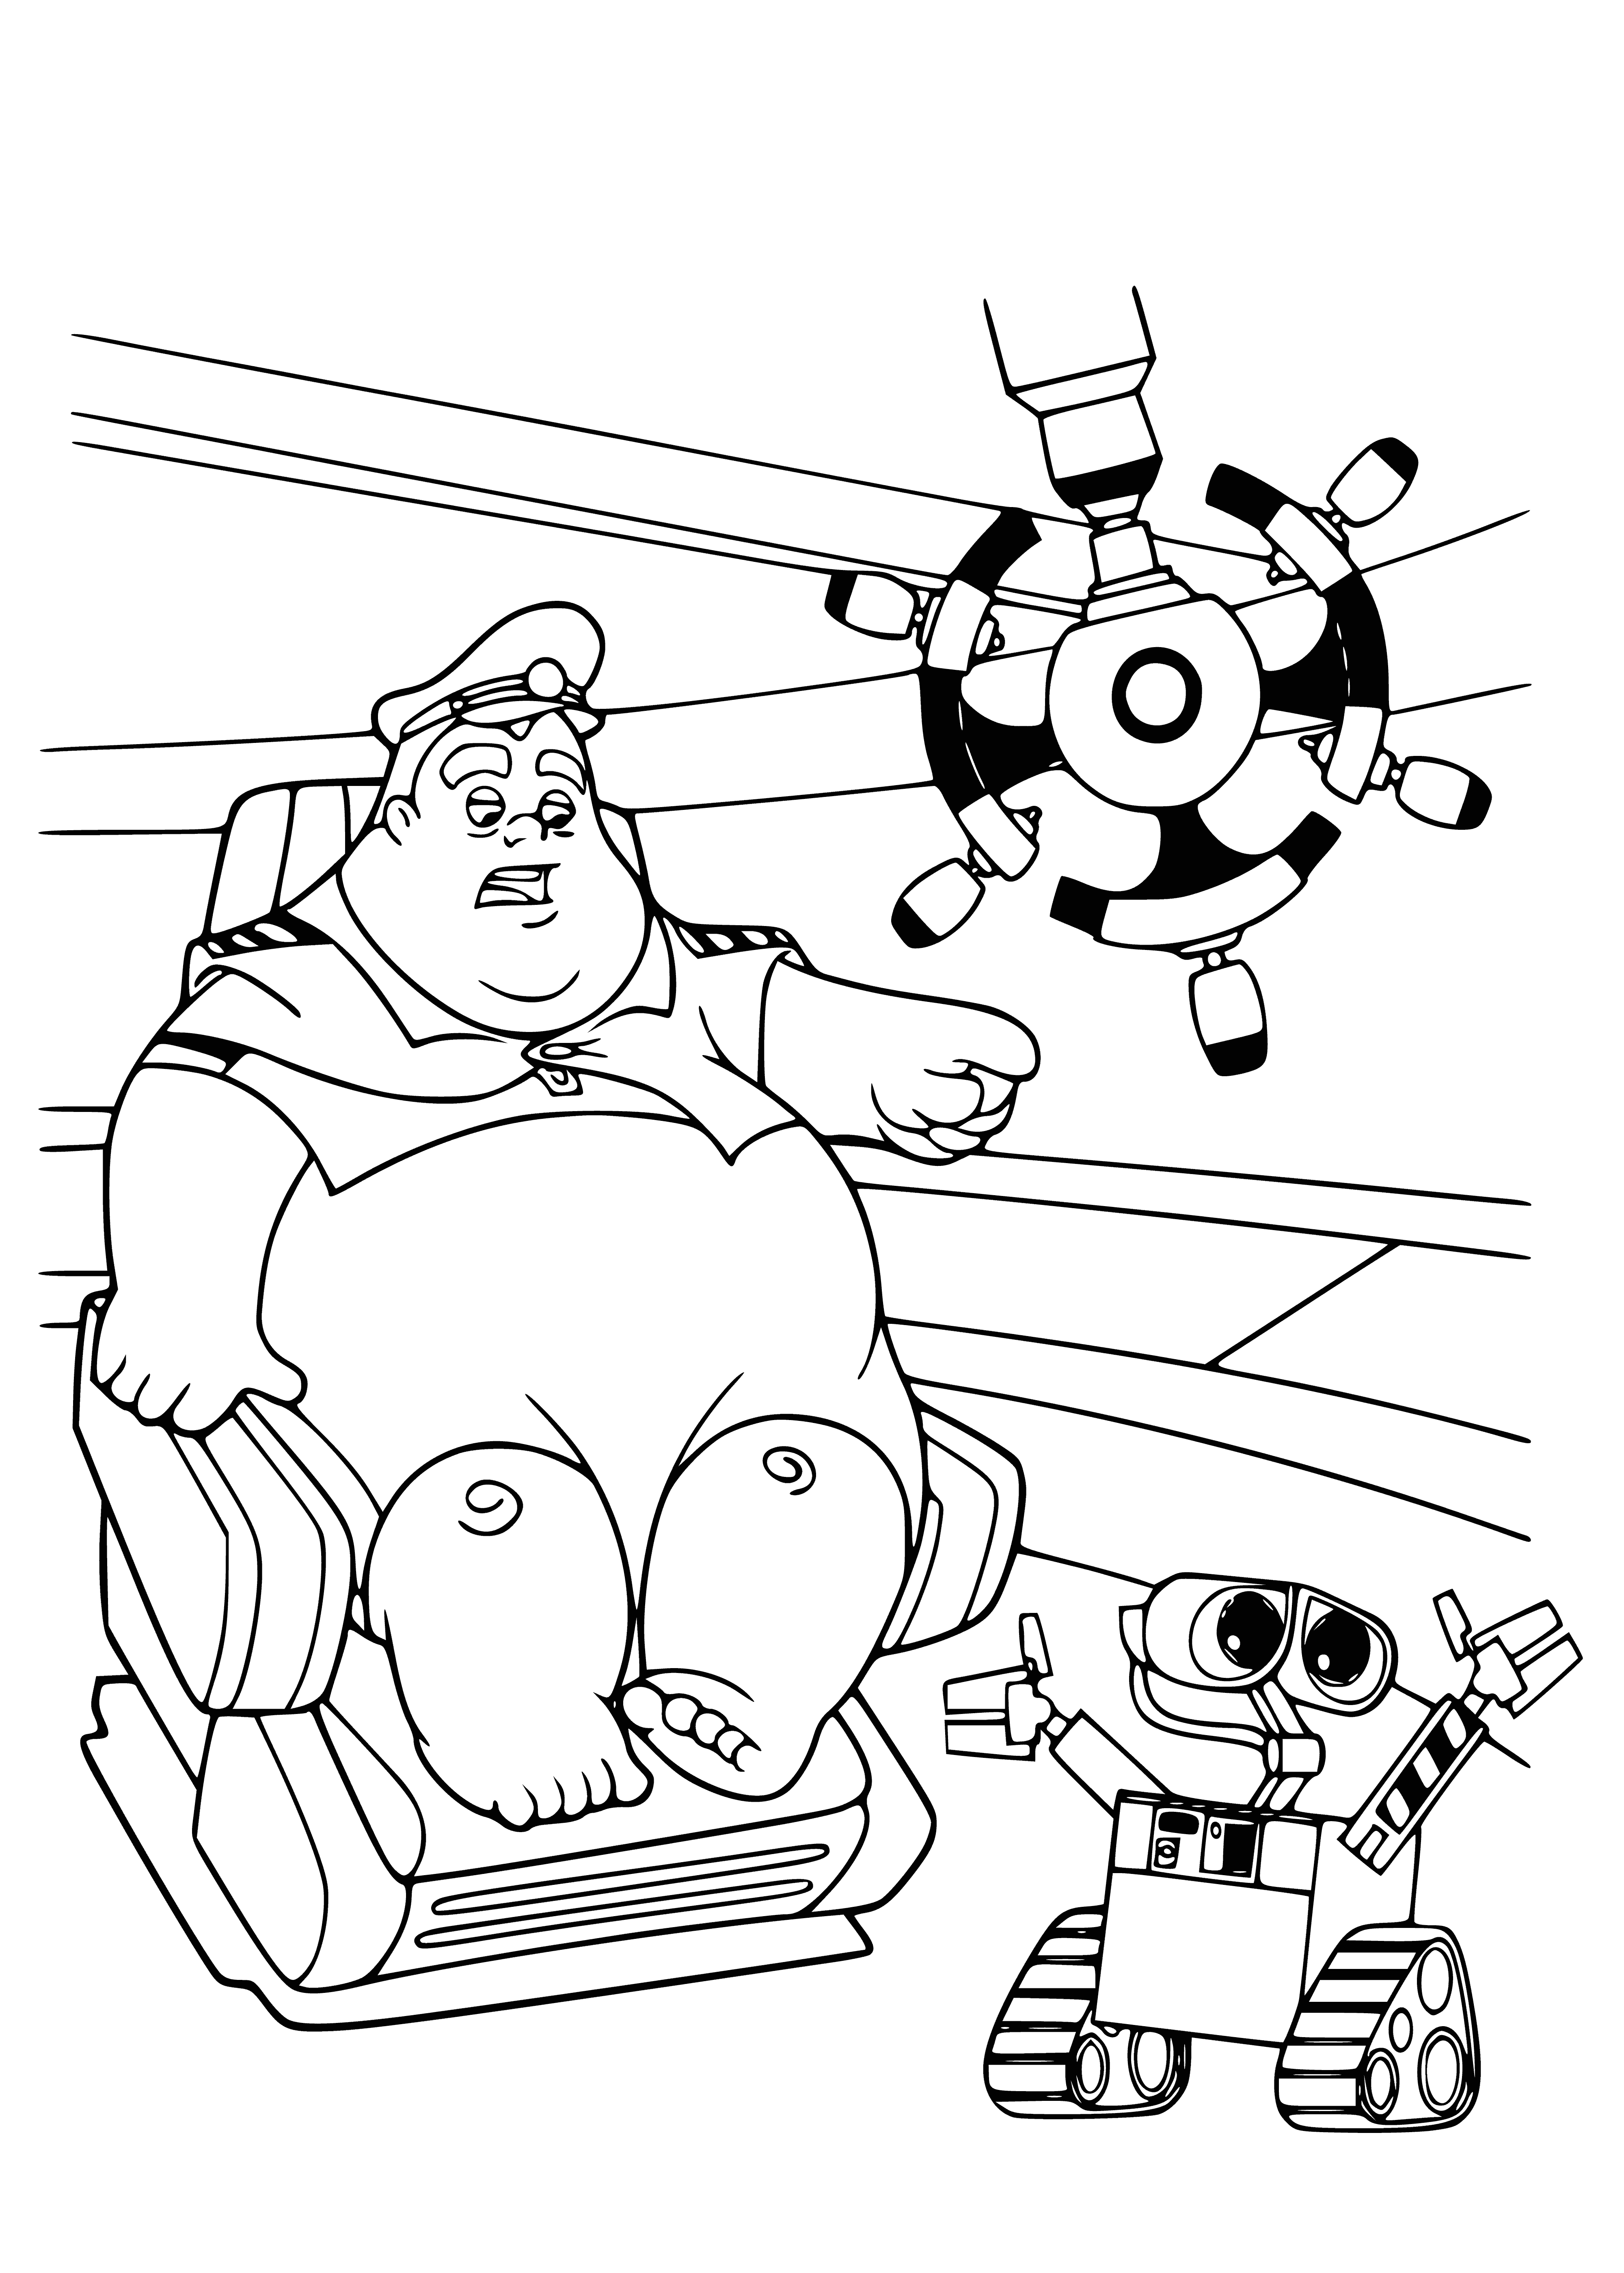 Captain and Valley coloring page